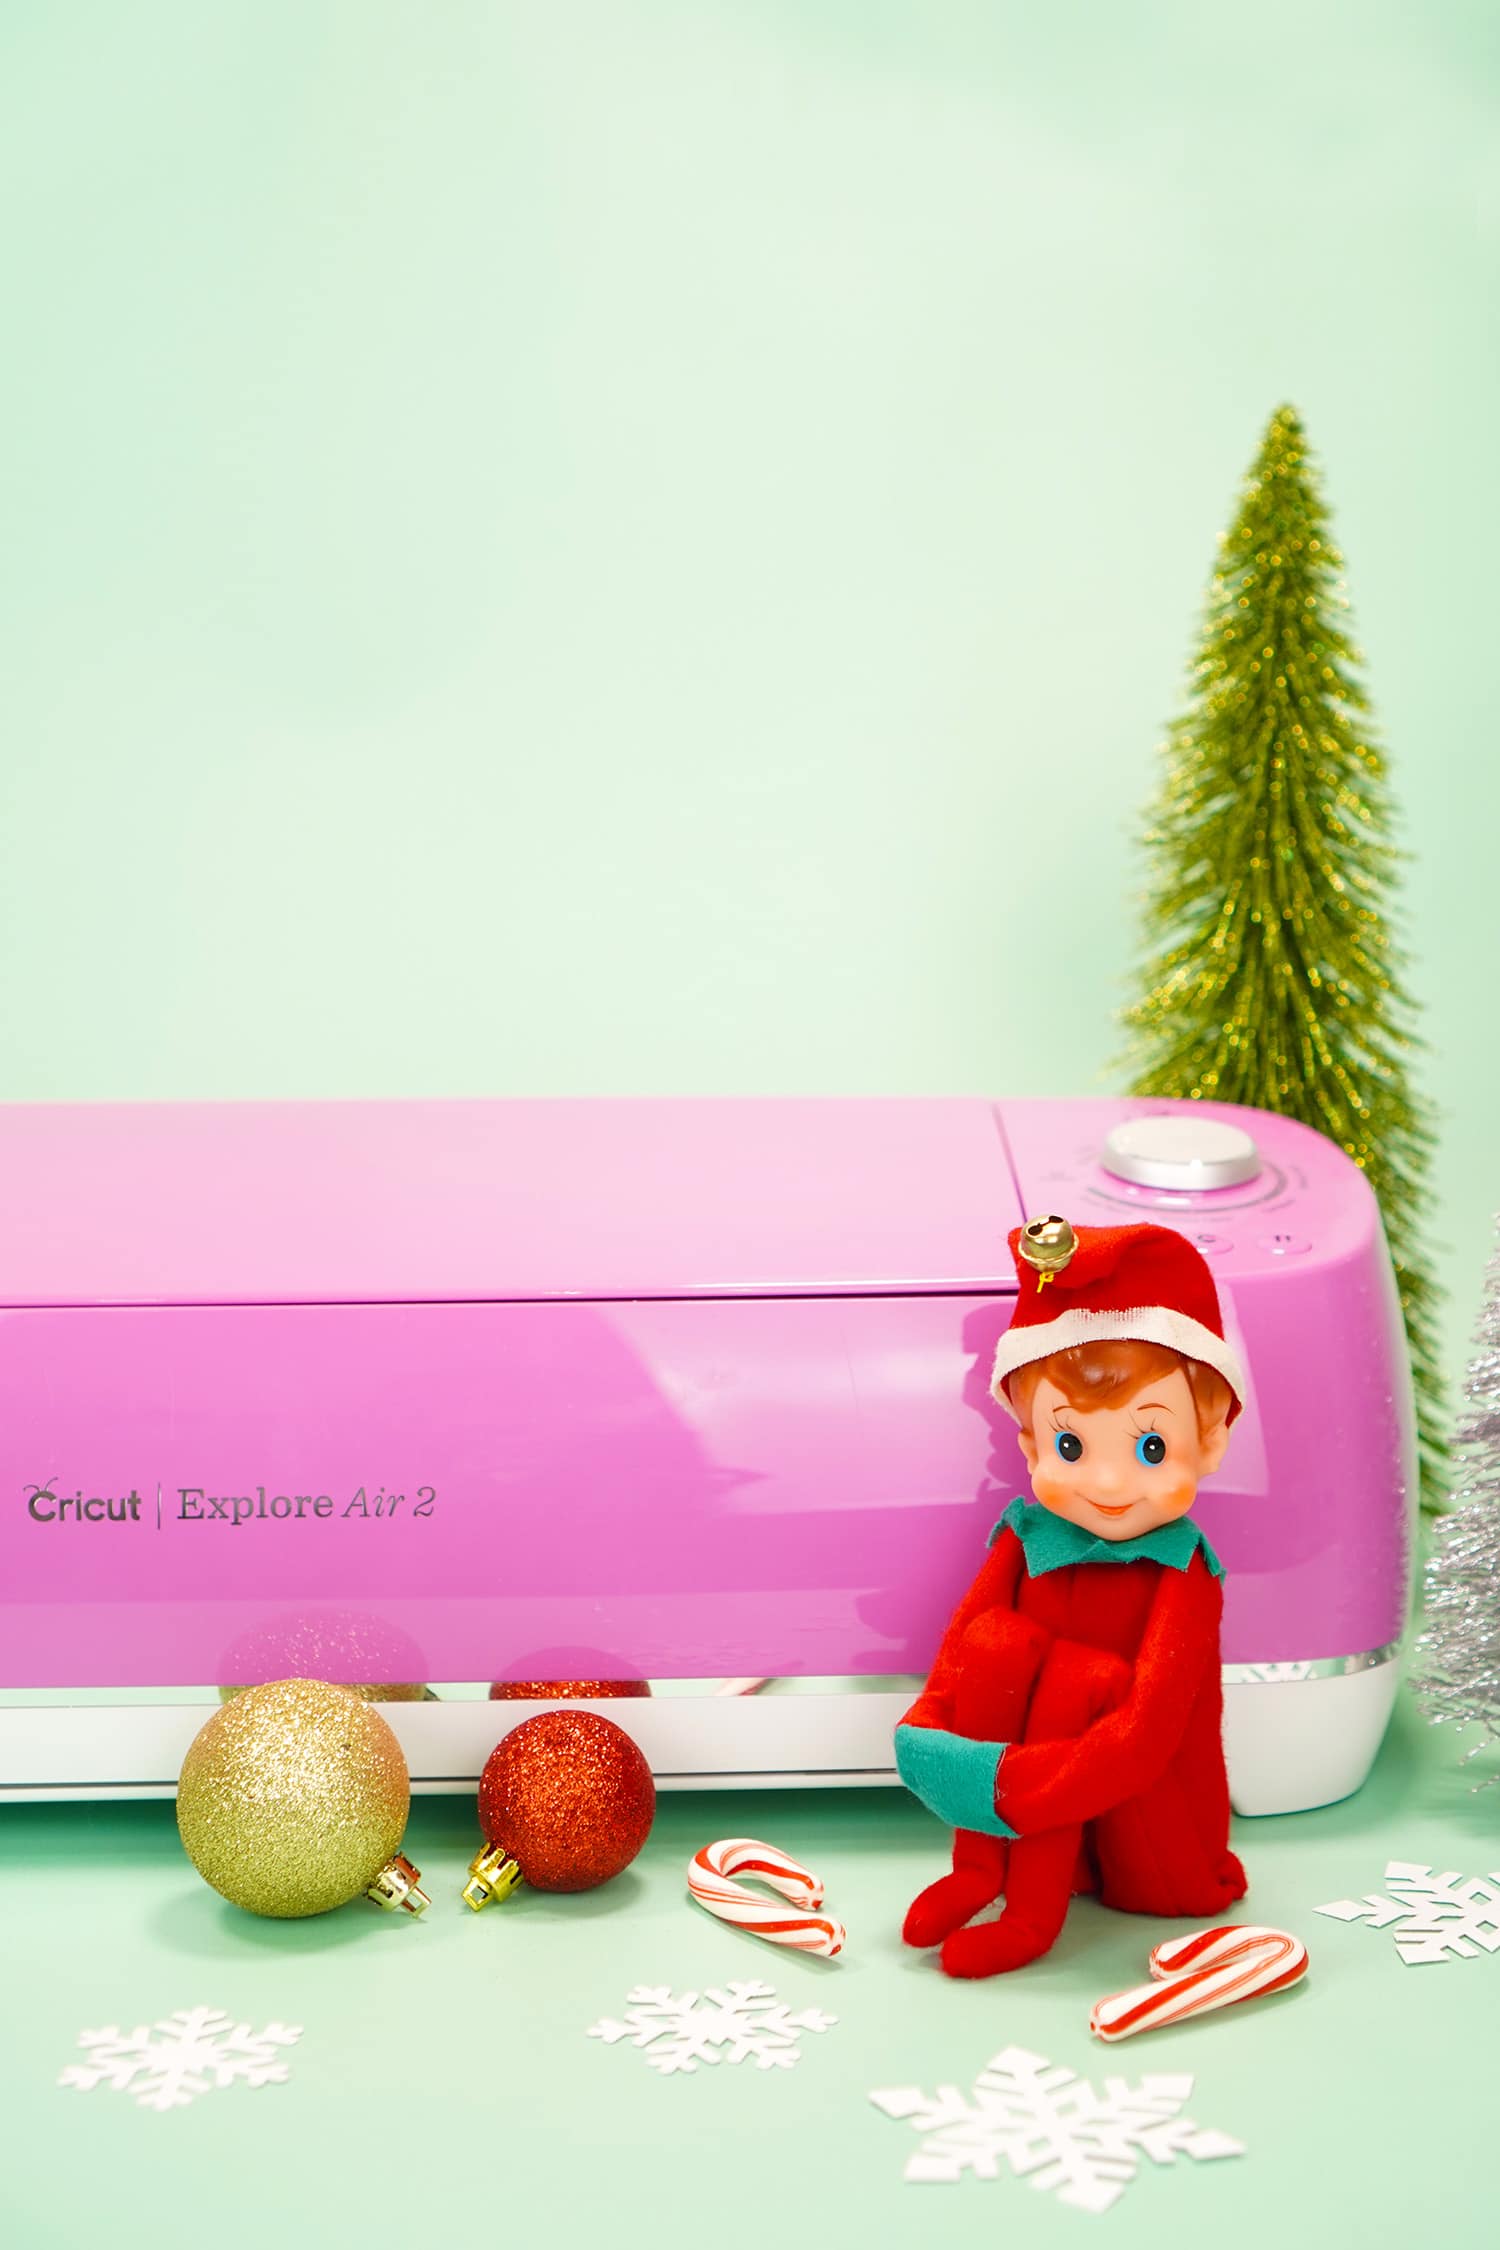 Vintage Elf in front of pink Cricut Explore Air machine on mint background with ornaments and bottle brush trees